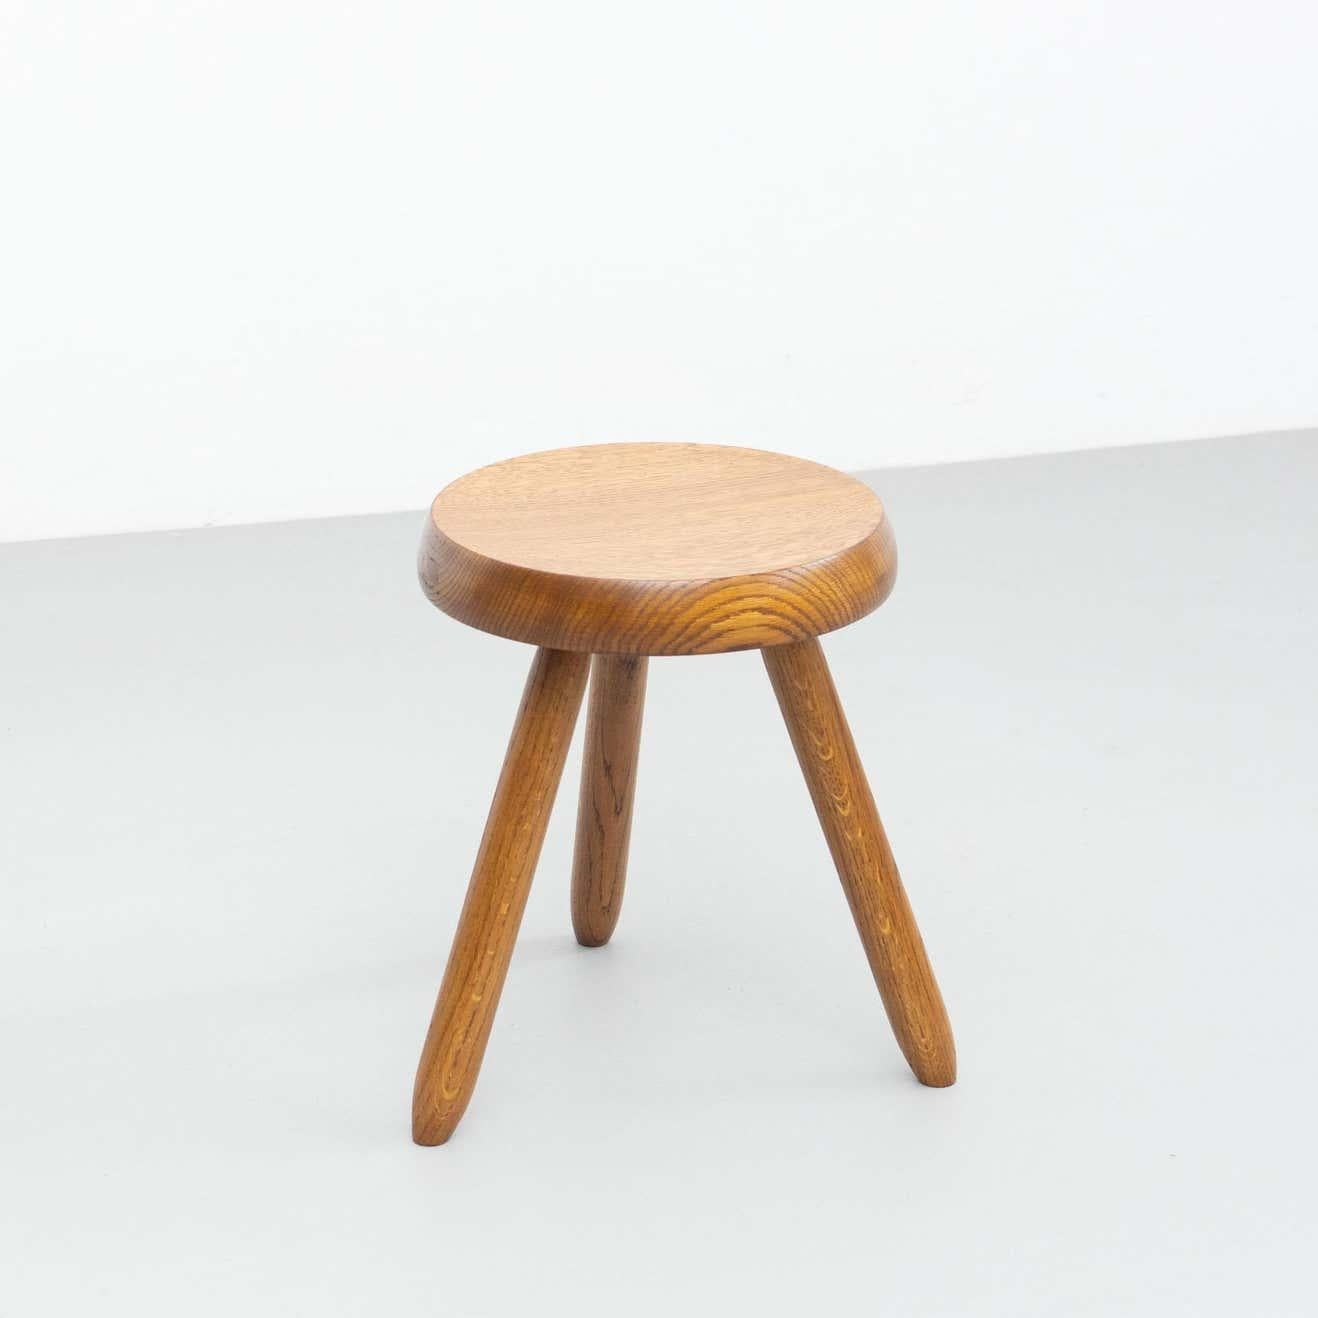 Late 20th Century Mid-Century Modern Set of Two Stools in the Style of Charlotte Perriand